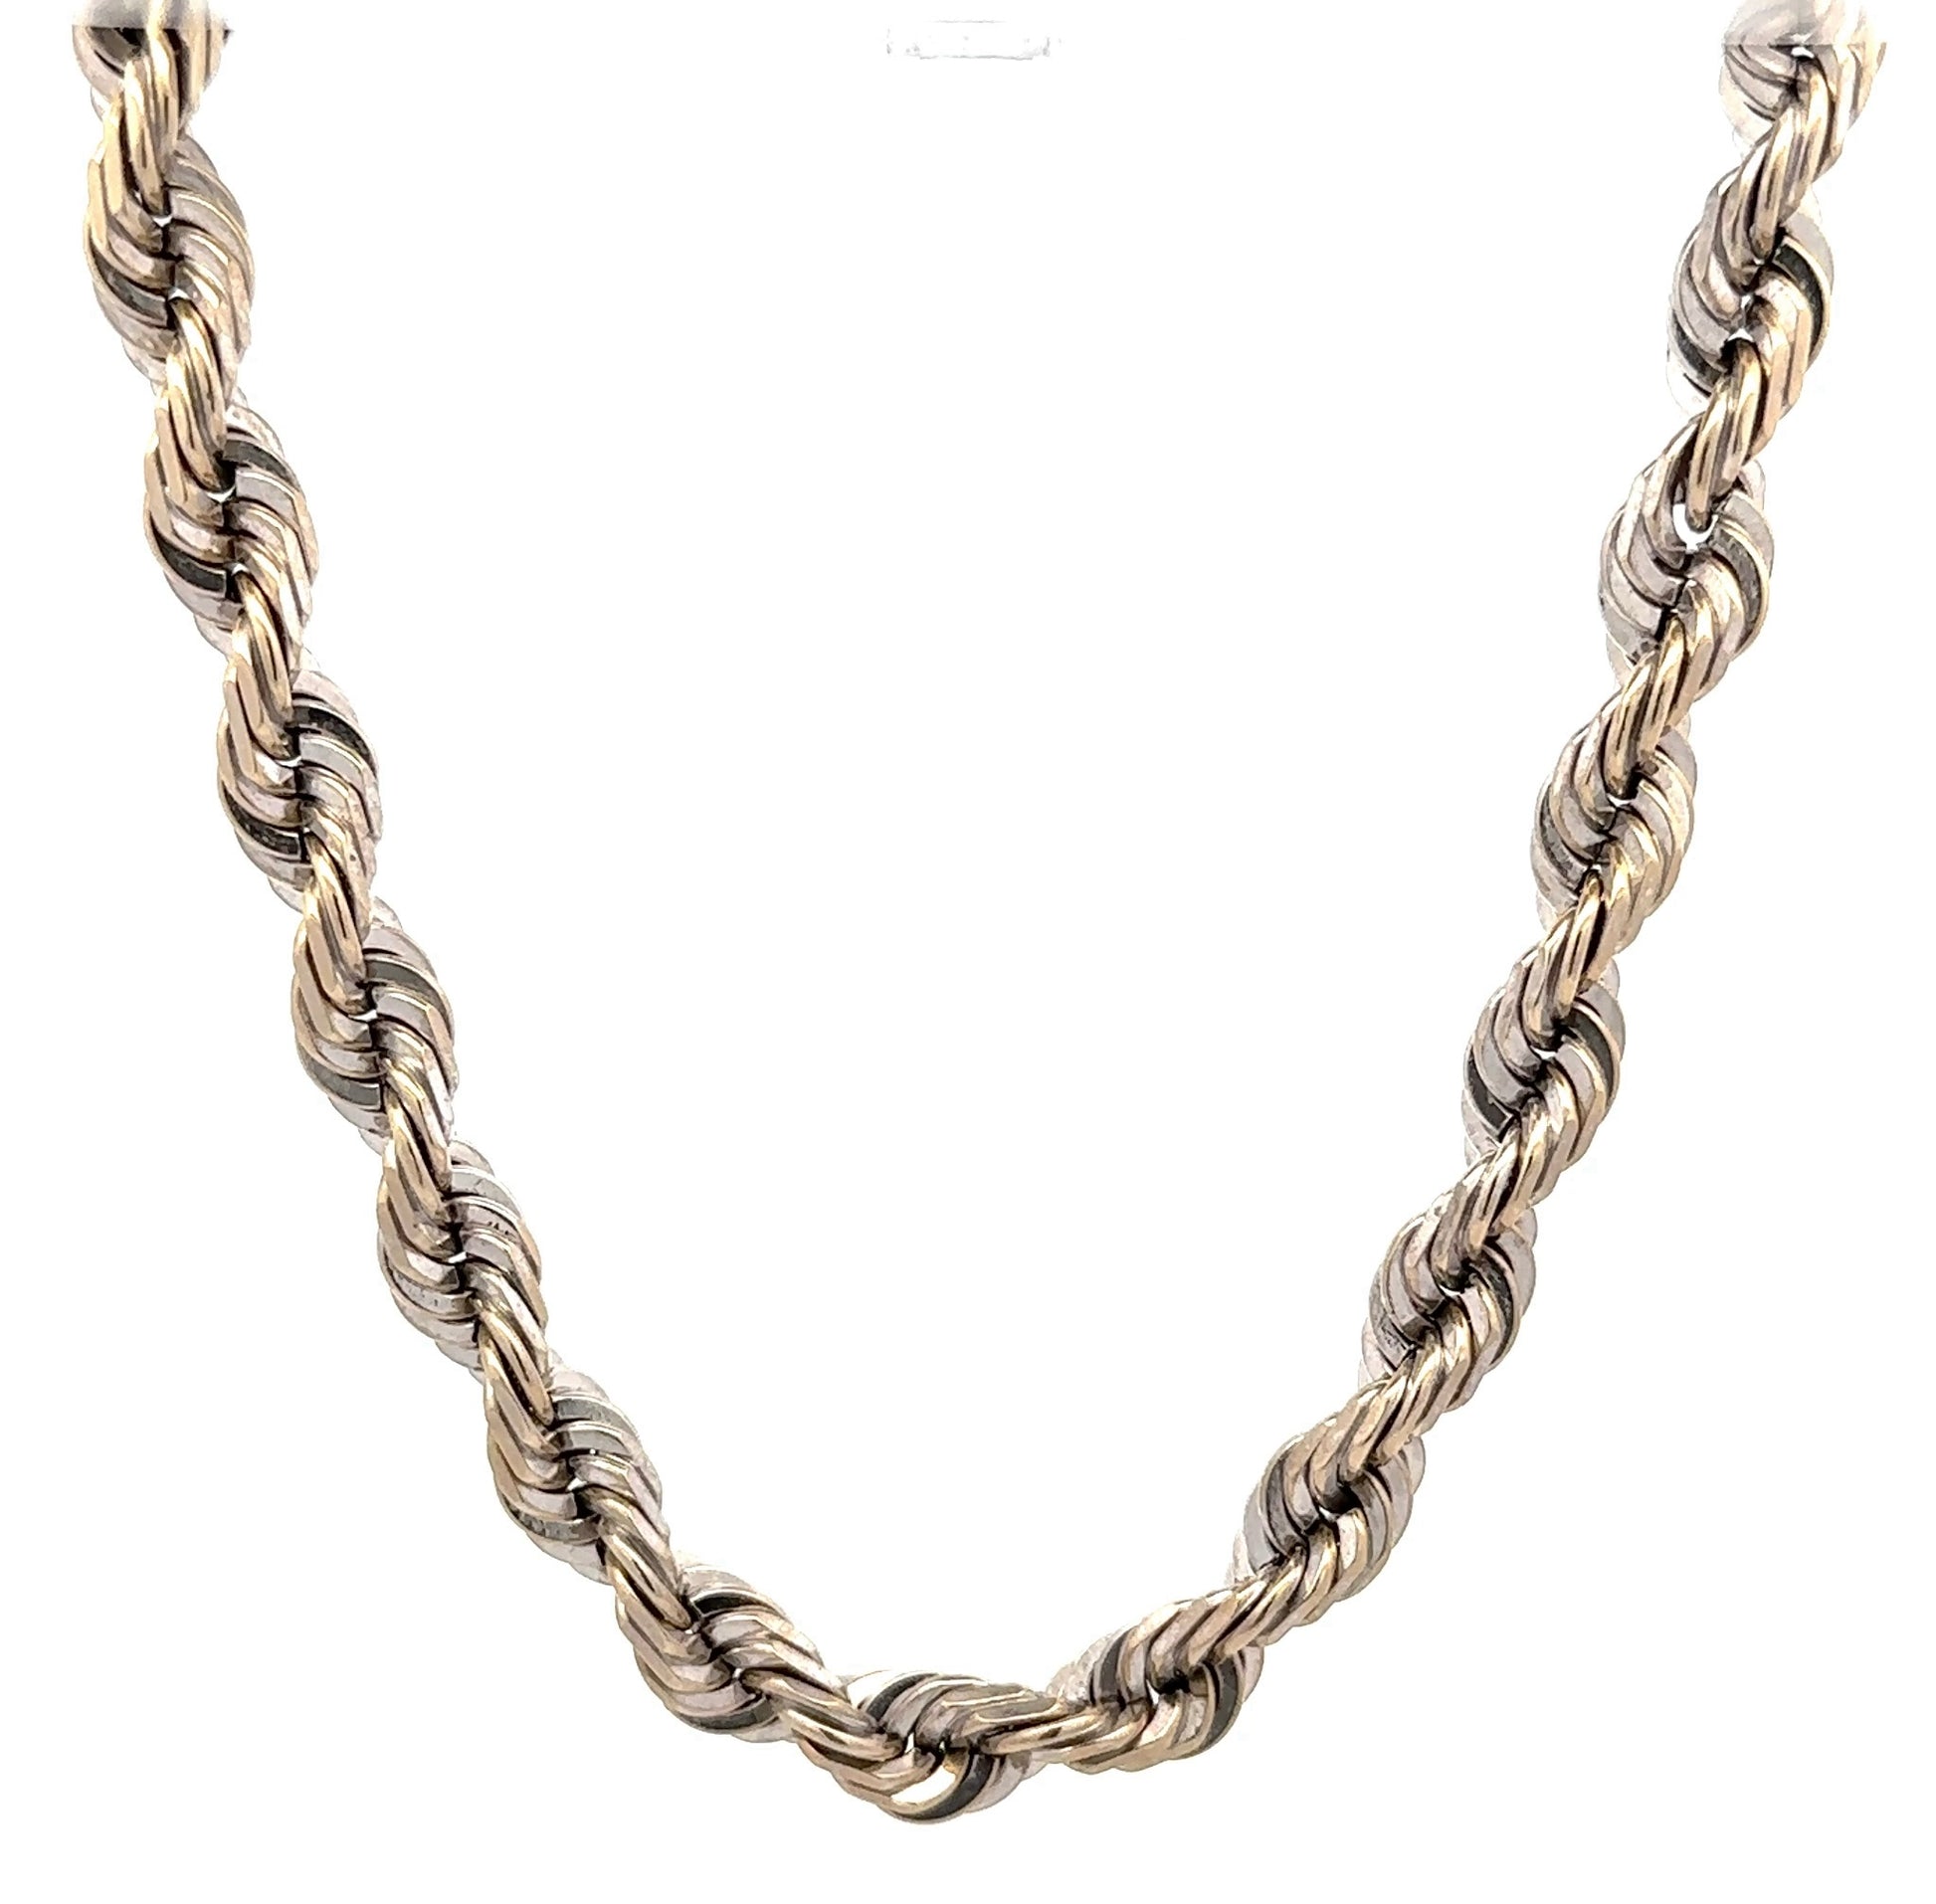 hanging photo of solid white gold rope chain